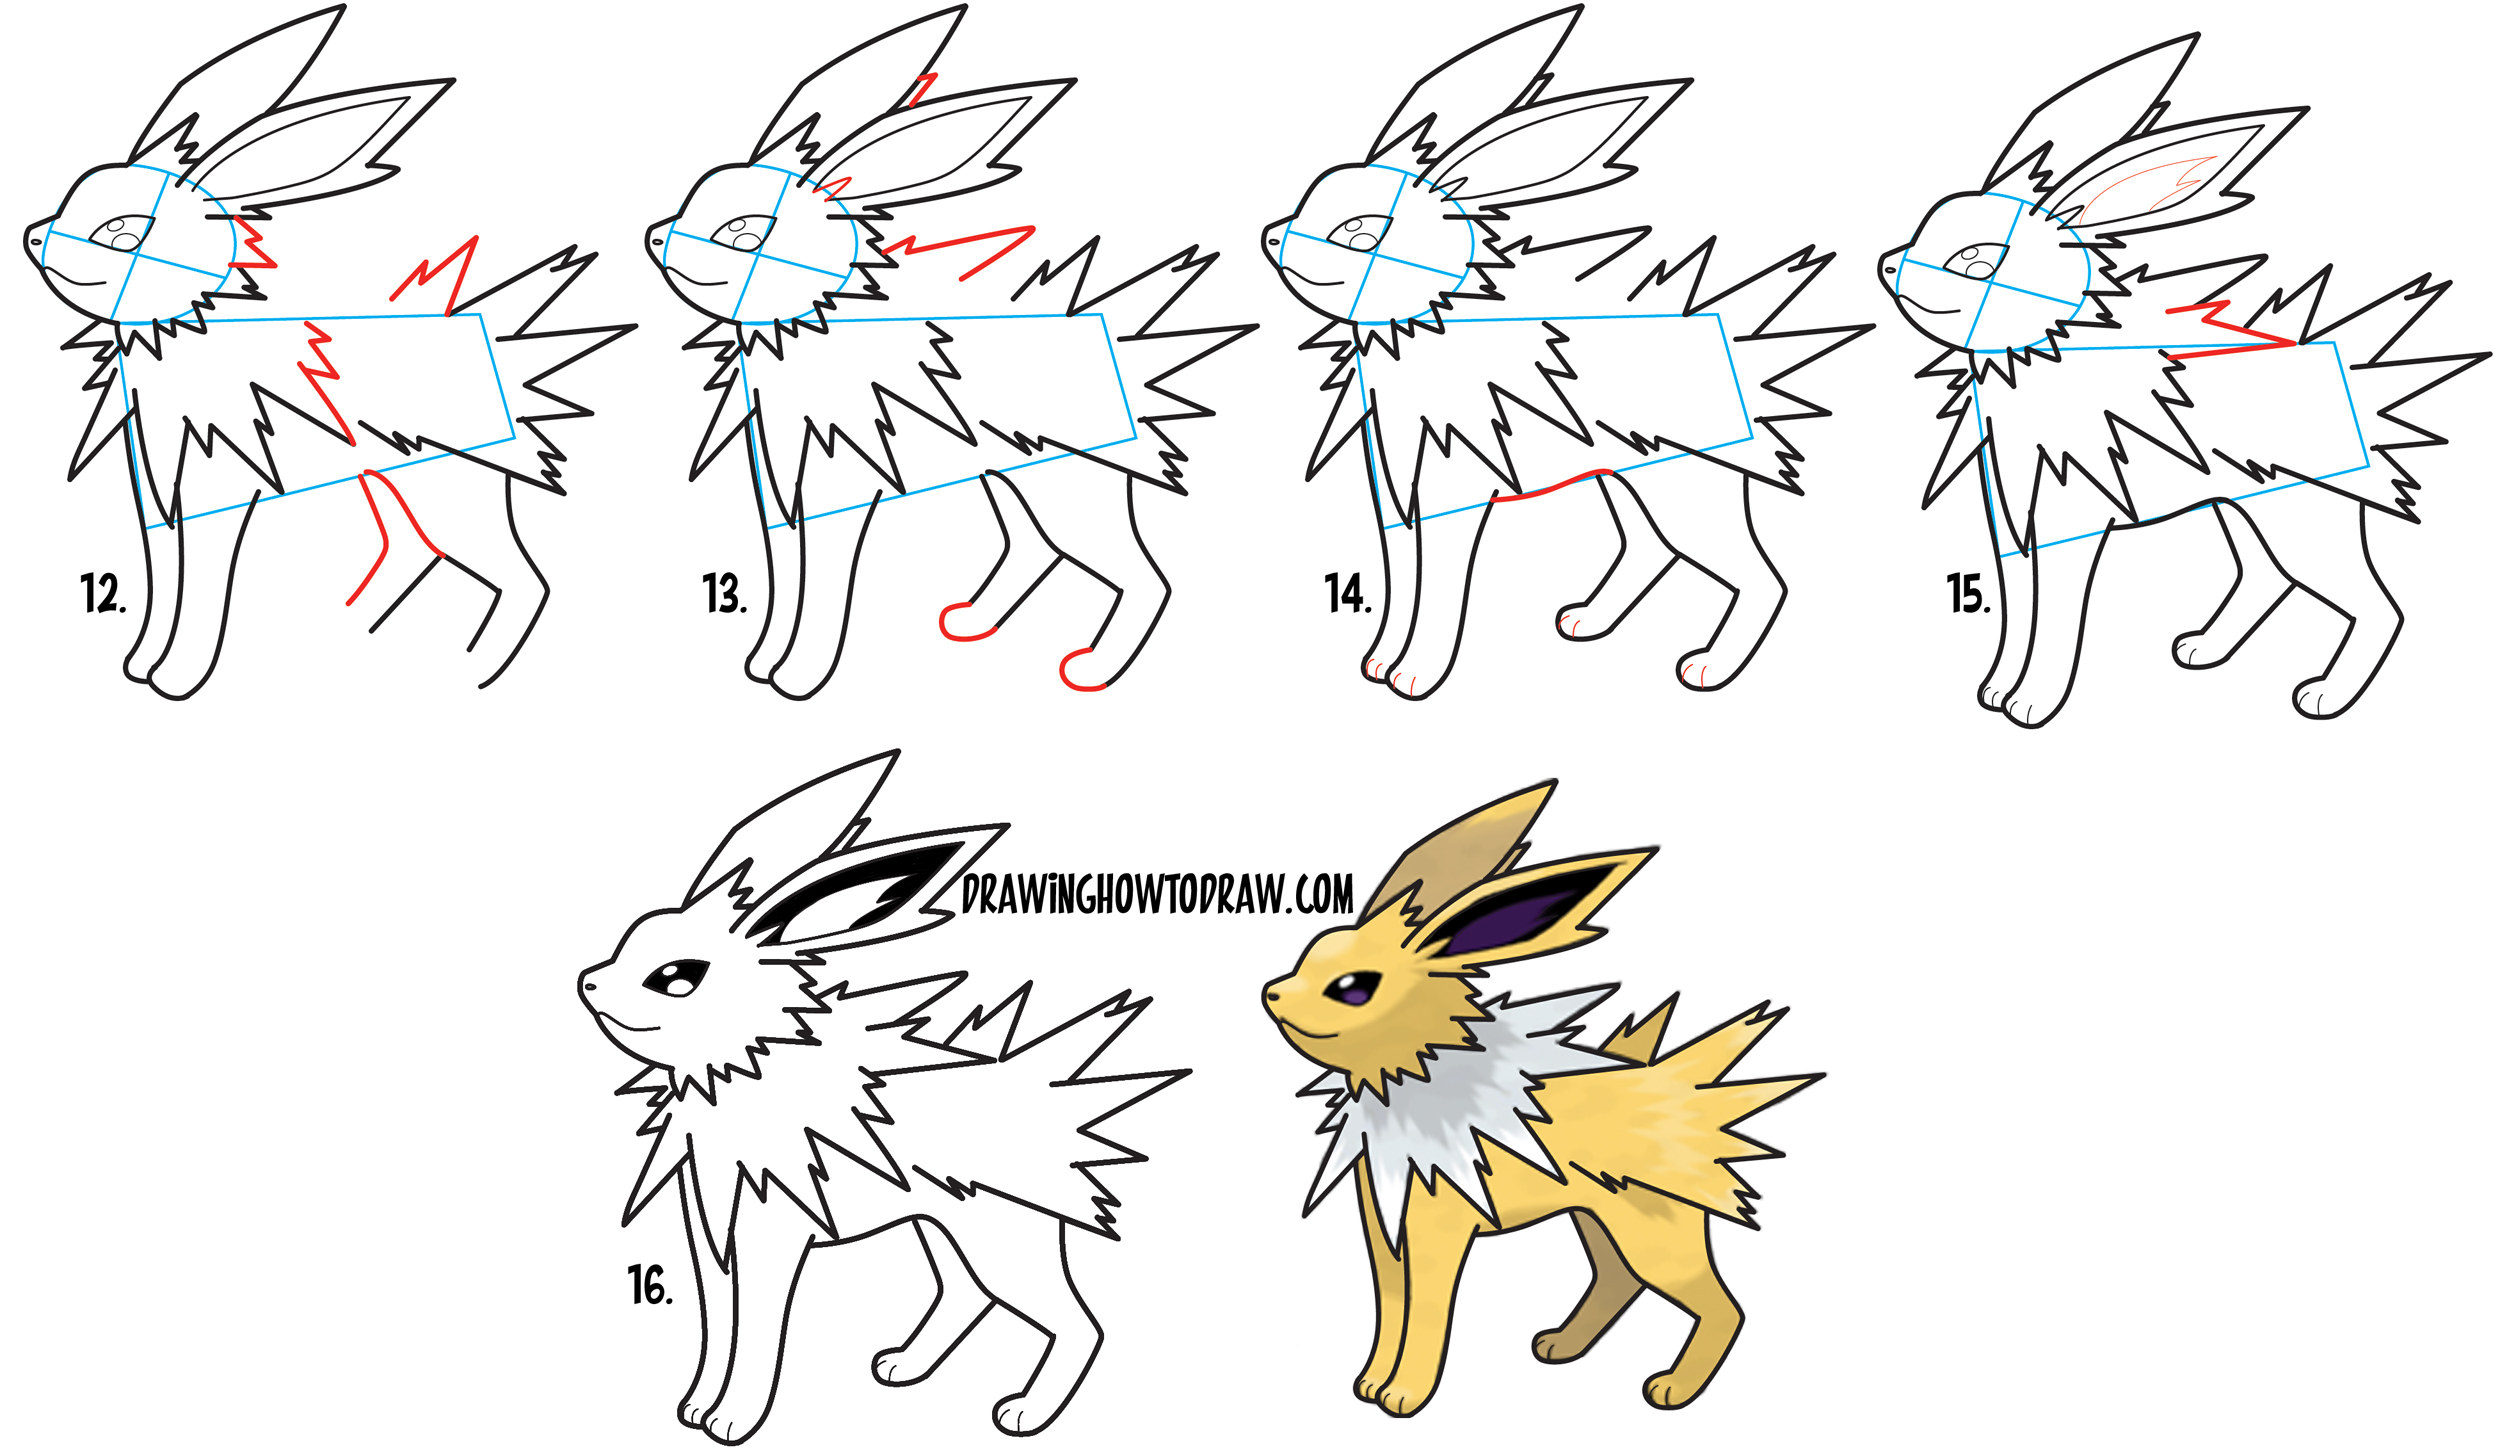 How to Draw Jolteon from Pokemon in Easy Step by Step Drawing Tutorial